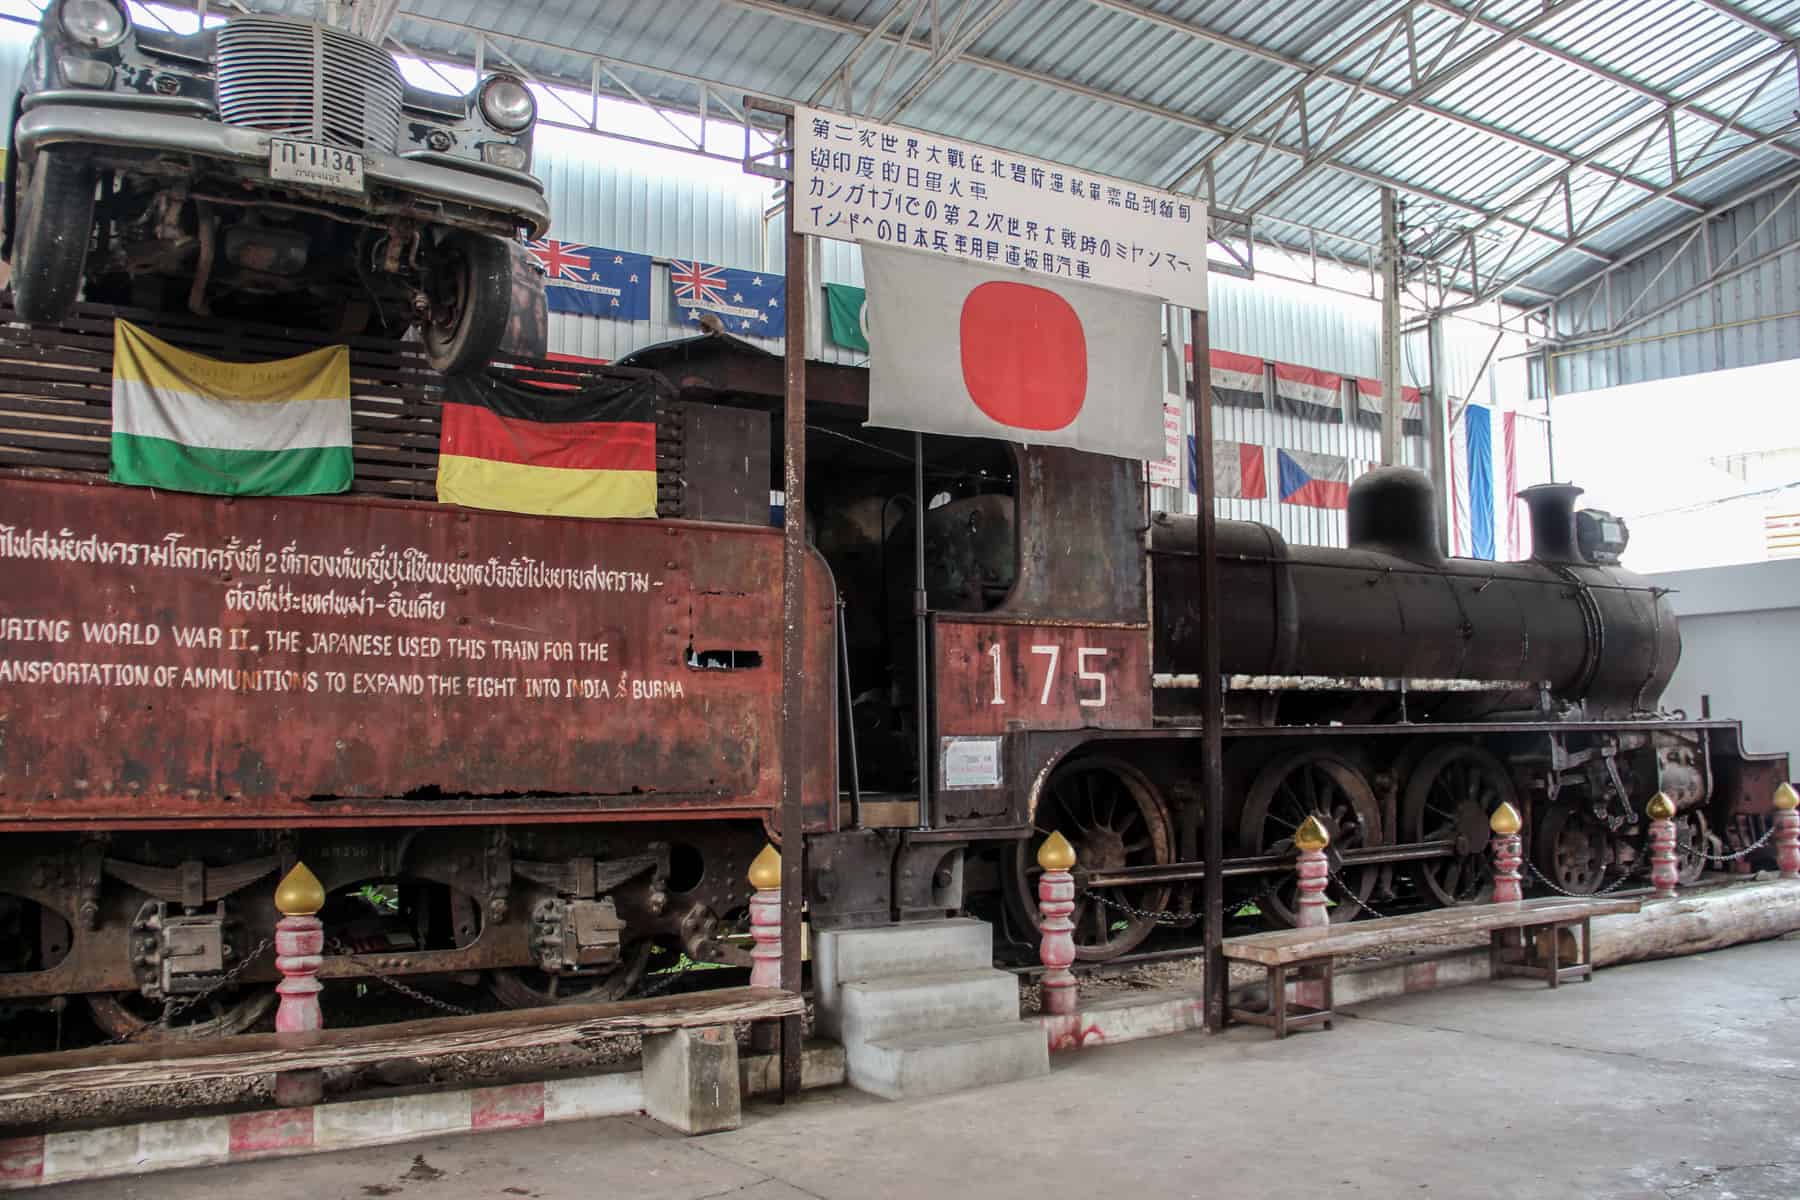 A red and black rusty Japanese train used during WWII on display at the JEATH Museum in Thailand.